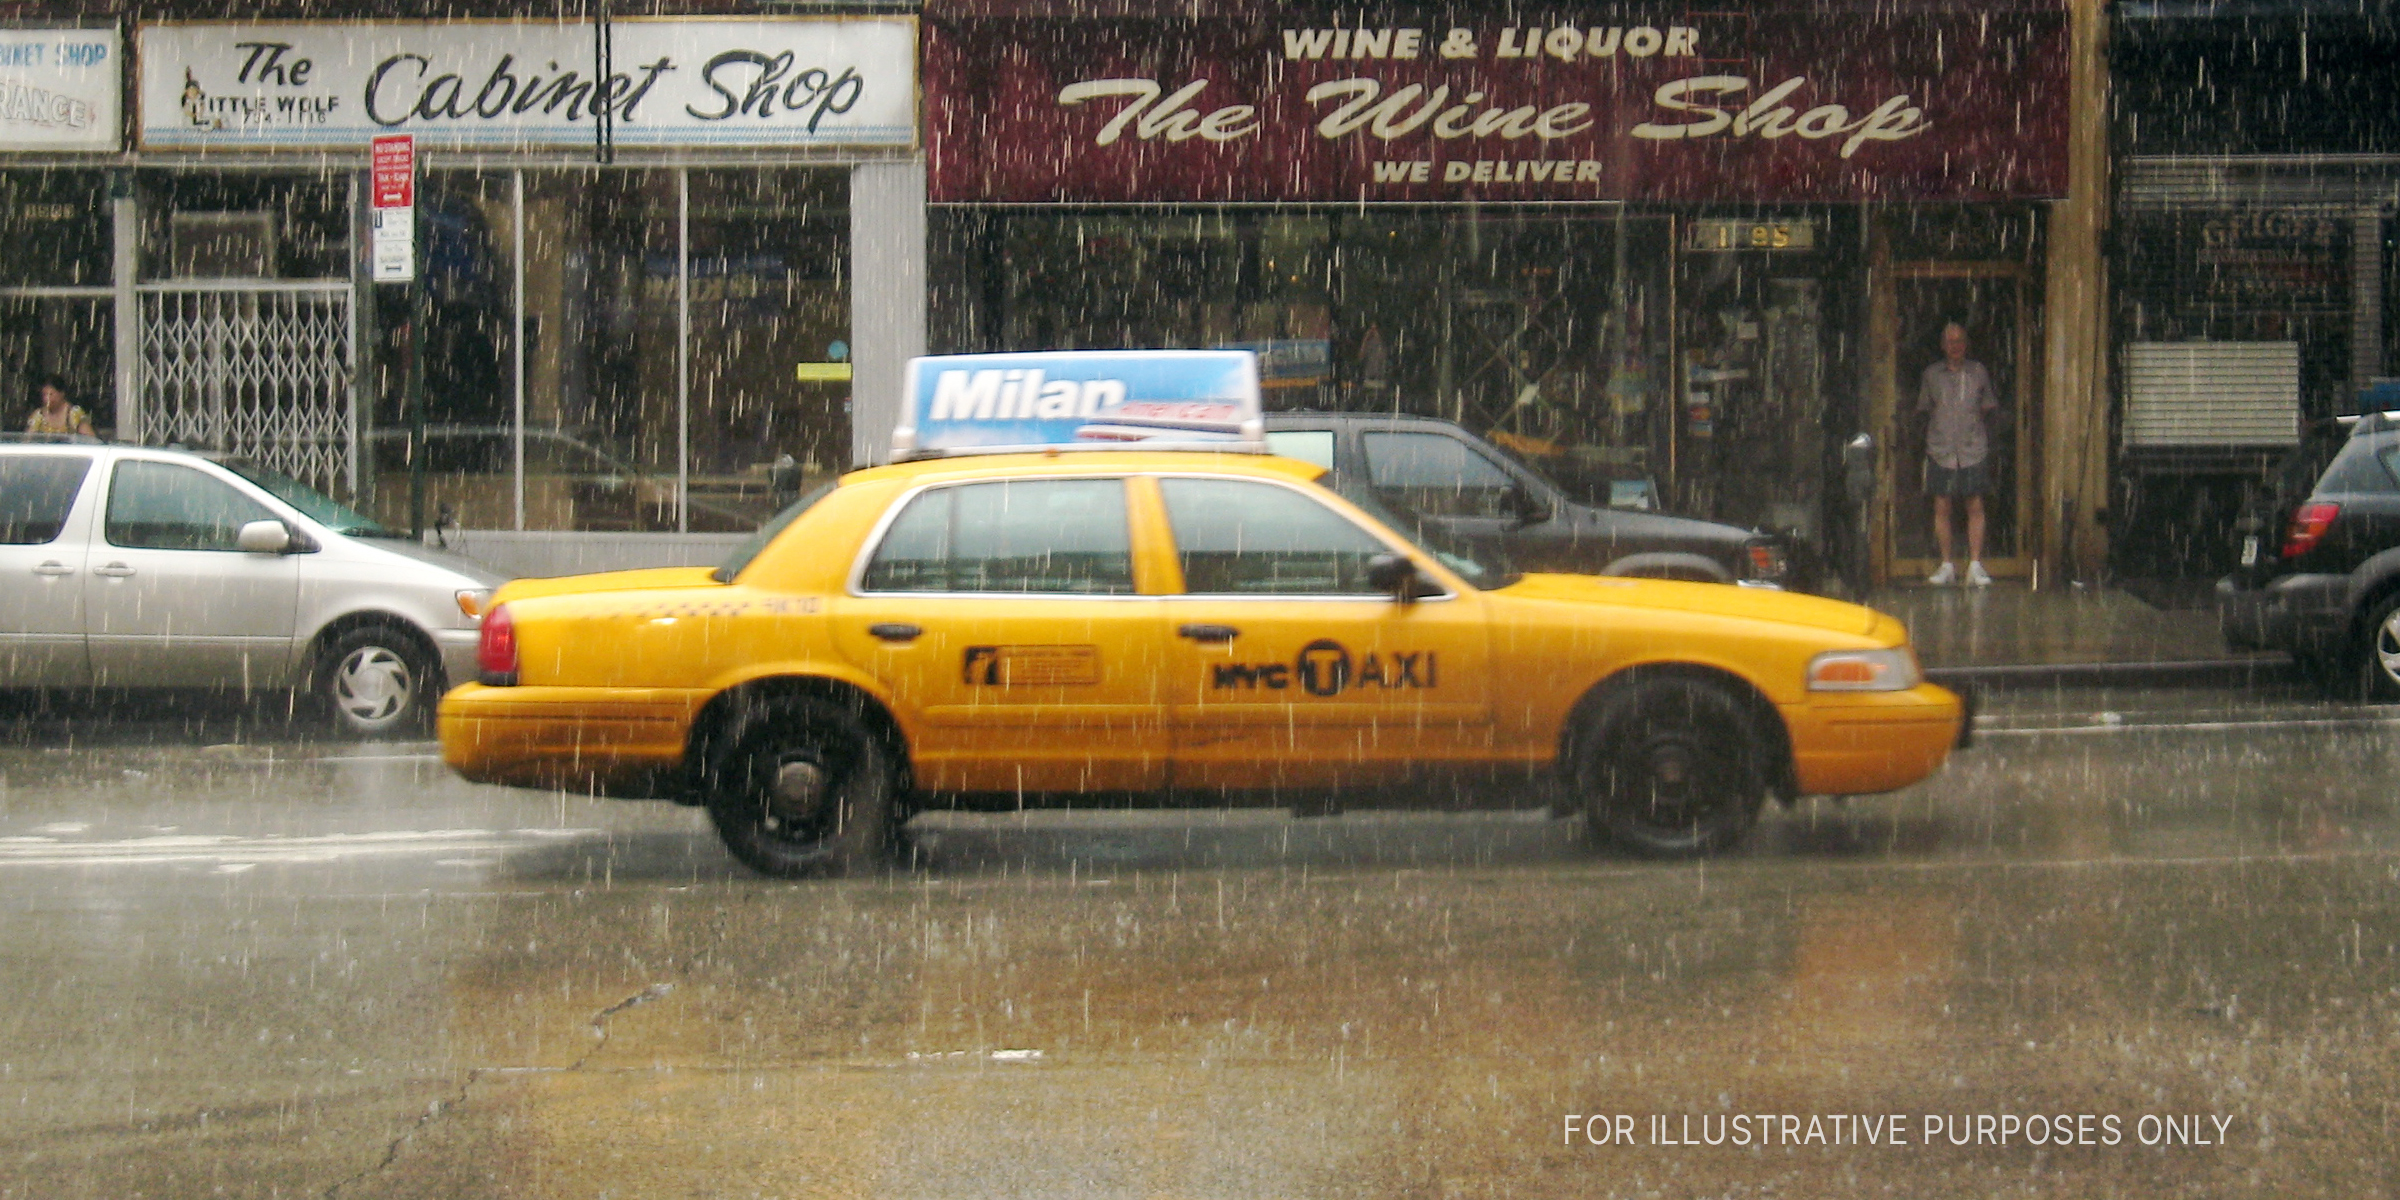 Yellow taxi cab driving on a city street during hard rainfall | Source: Flickr/wka (CC BY-SA 2.0)